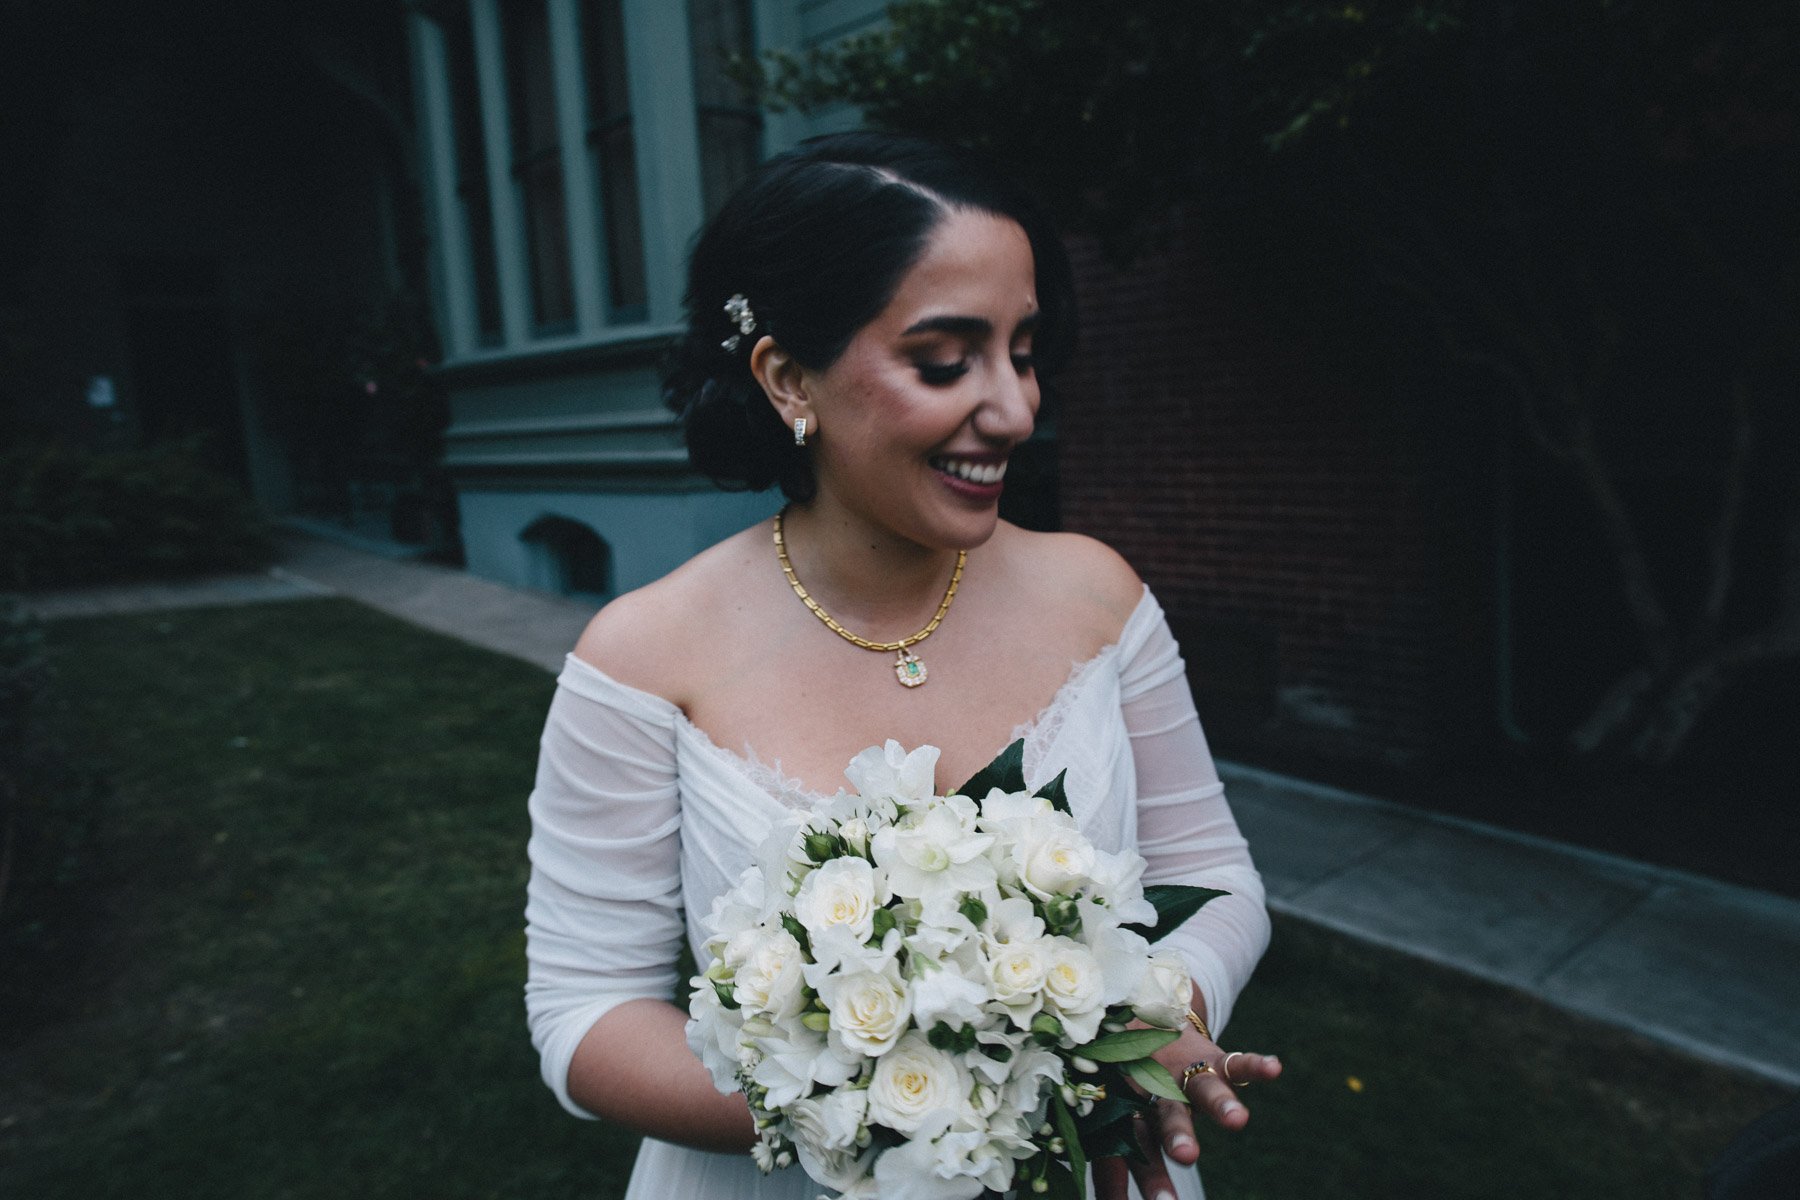 A bride on her wedding day at Haas-Lilienthal House